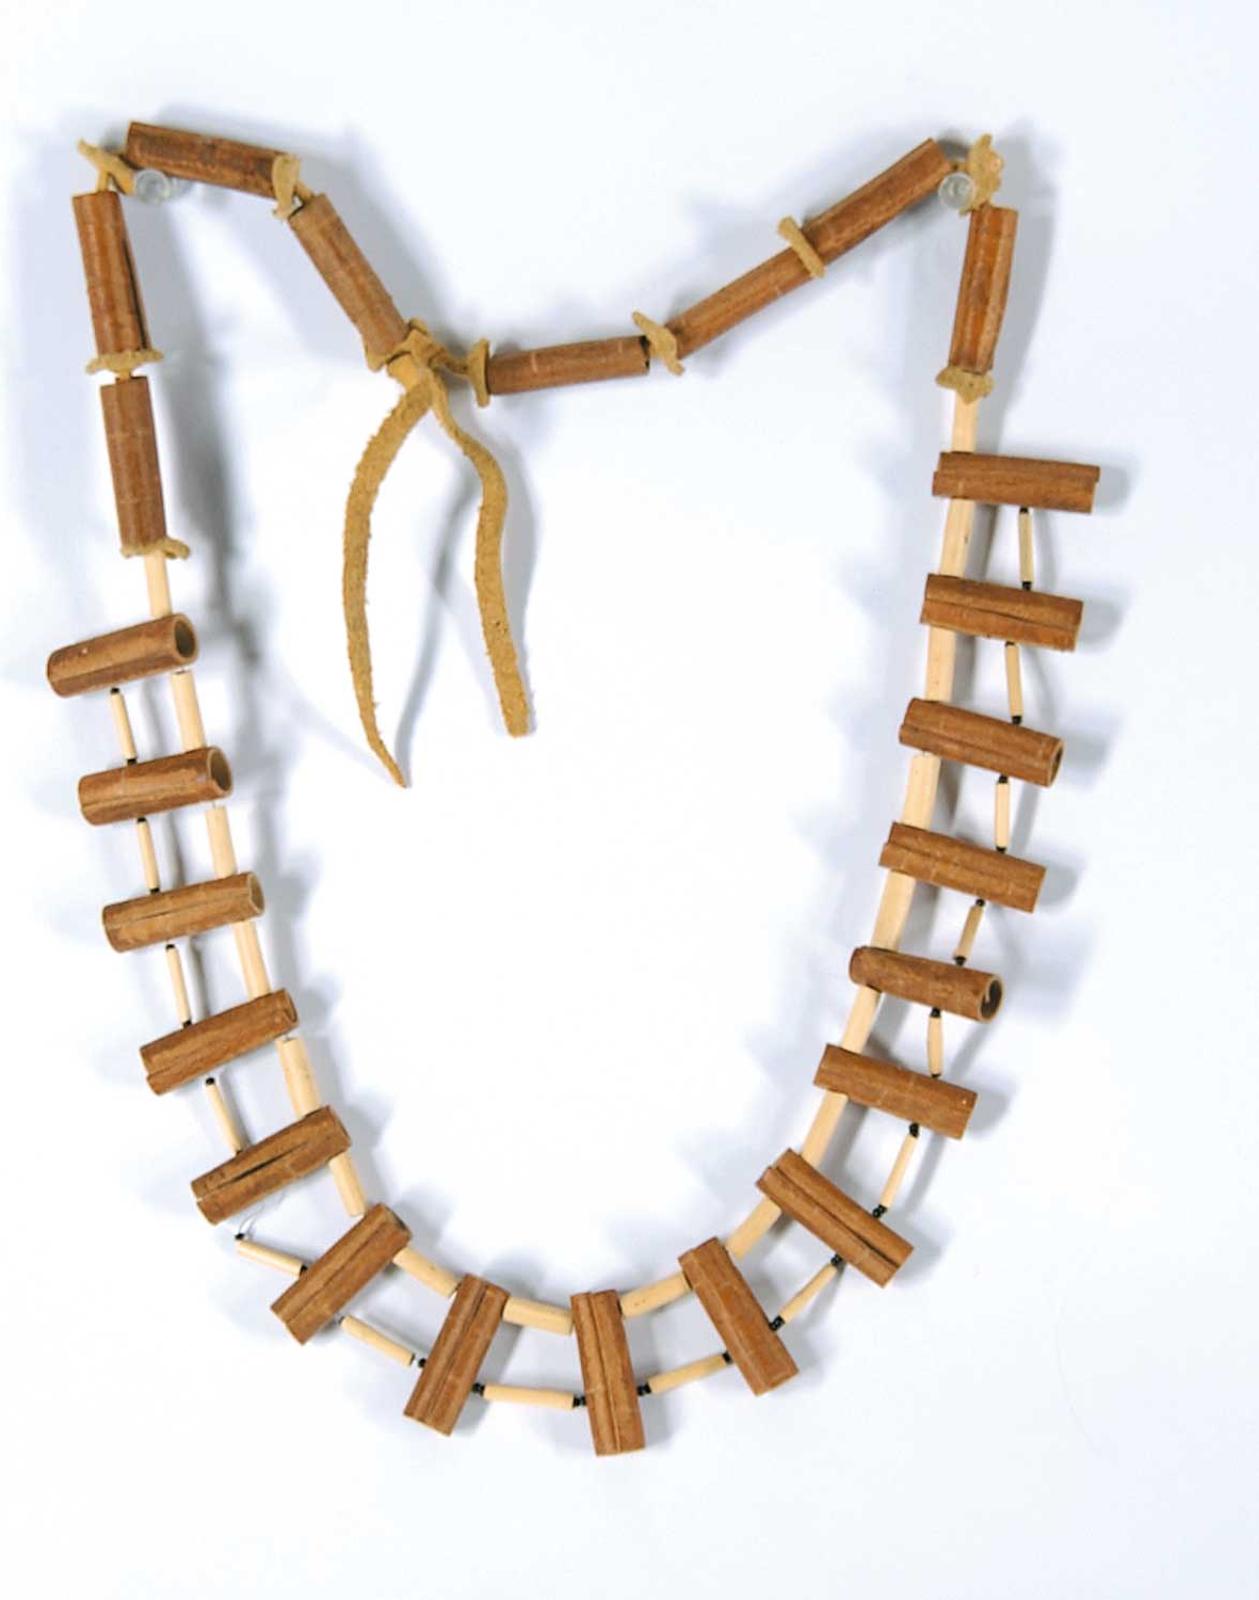 Robert Charles Aller (1922-2008) - Untitled - Rolled Birch Bark Necklace with Black Beads on Moose Hide